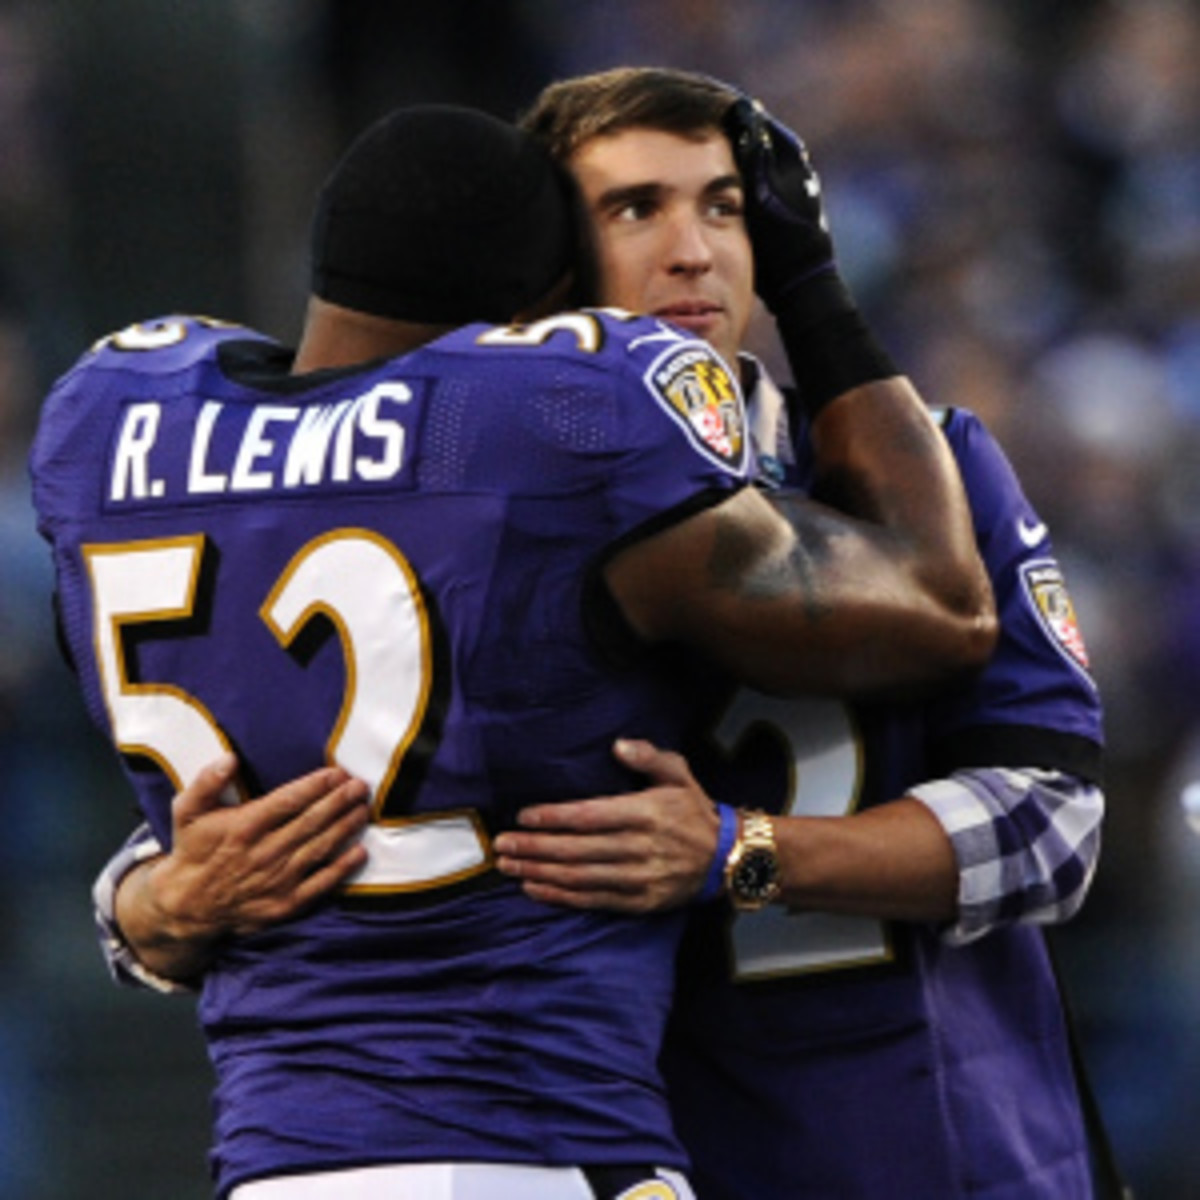 Michael Phelps and Ray Lewis have forged an unlikely friendship over the years. (Patrick Smith/Getty Images)